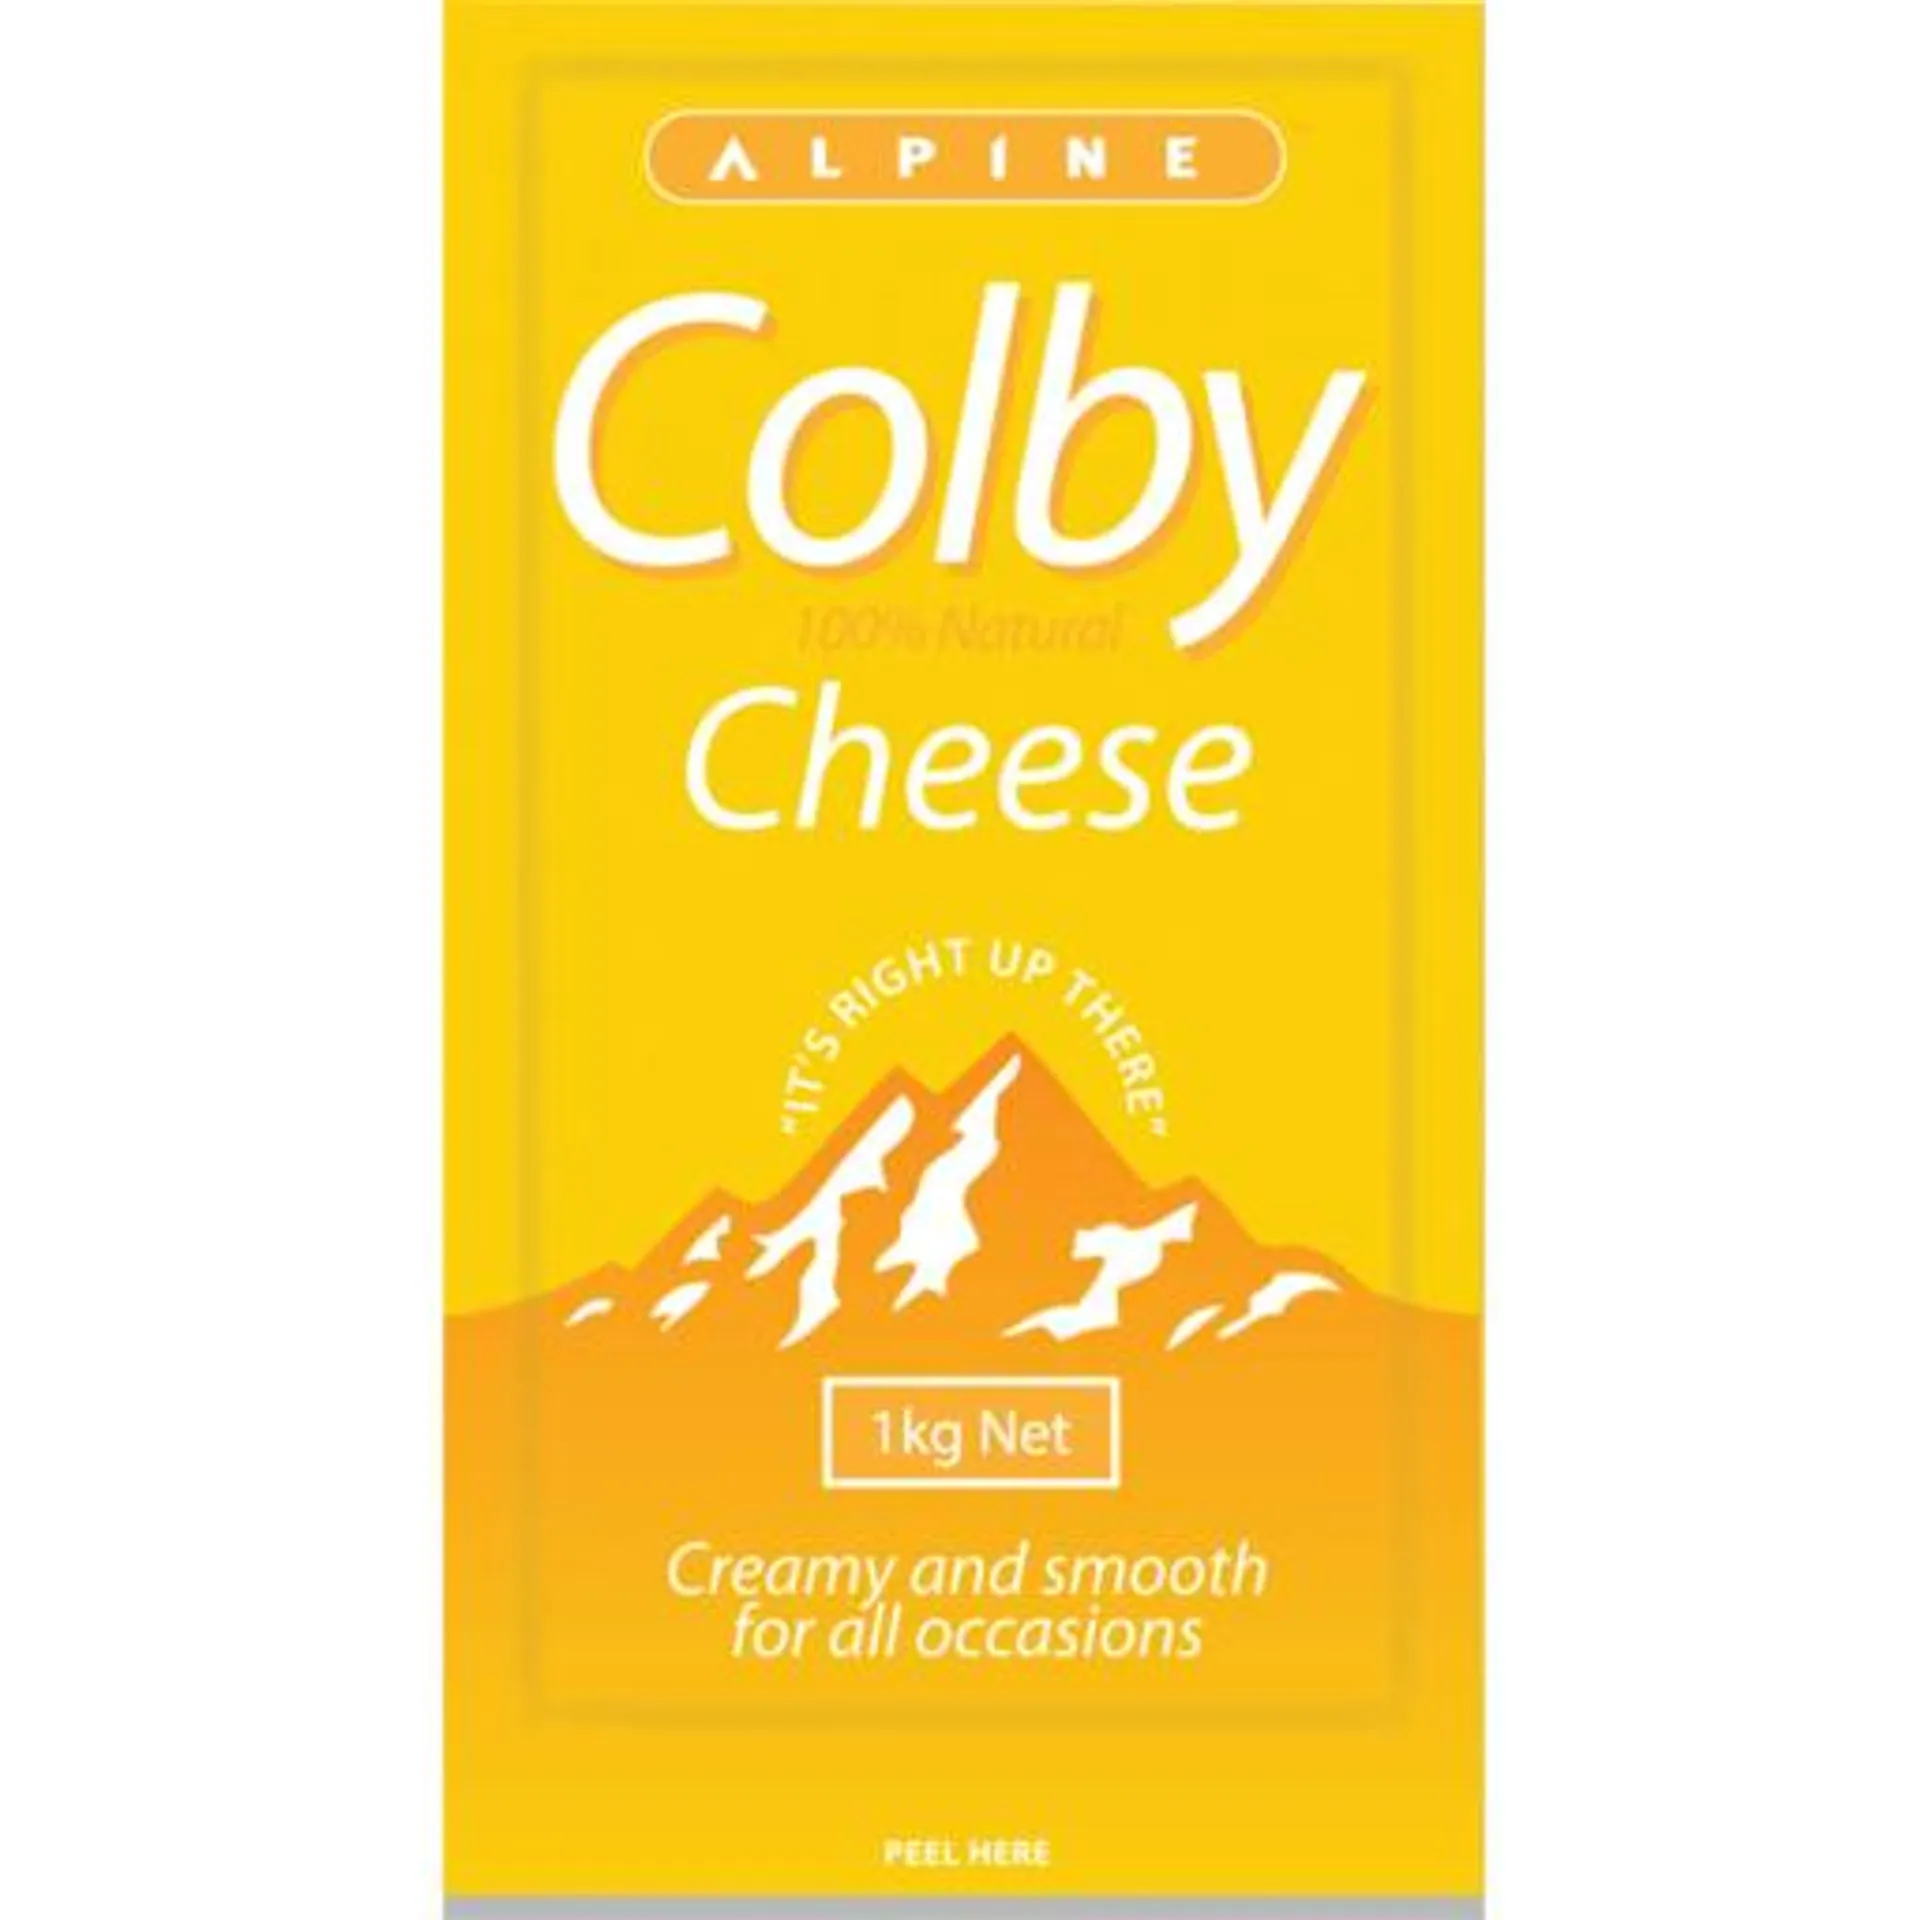 Alpine Cheese Colby 1kg